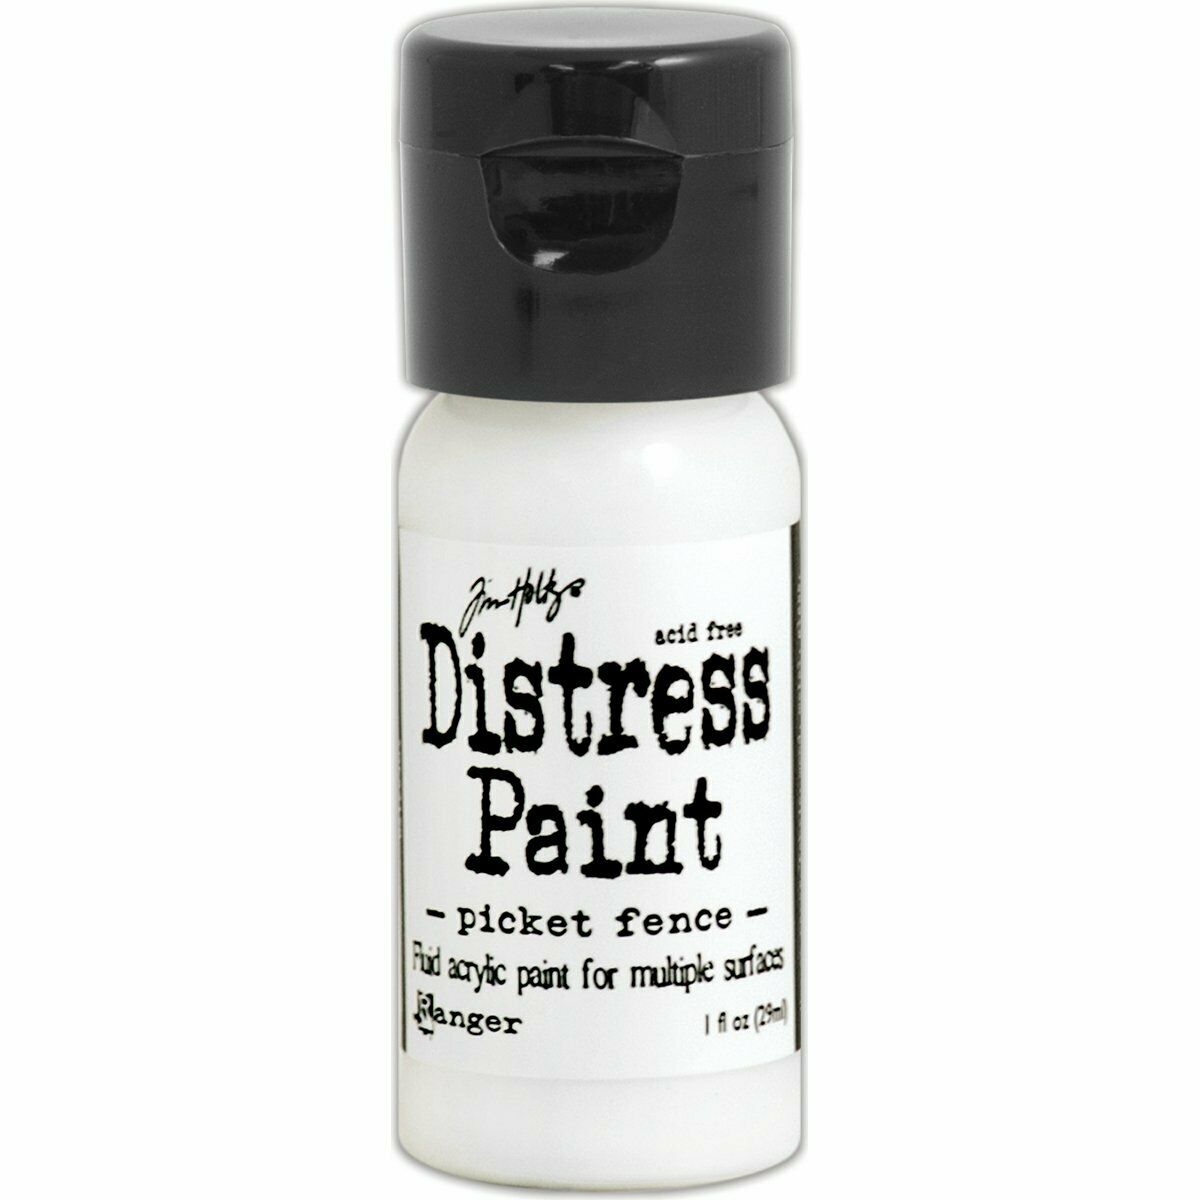 Distress Paint Picket Fence